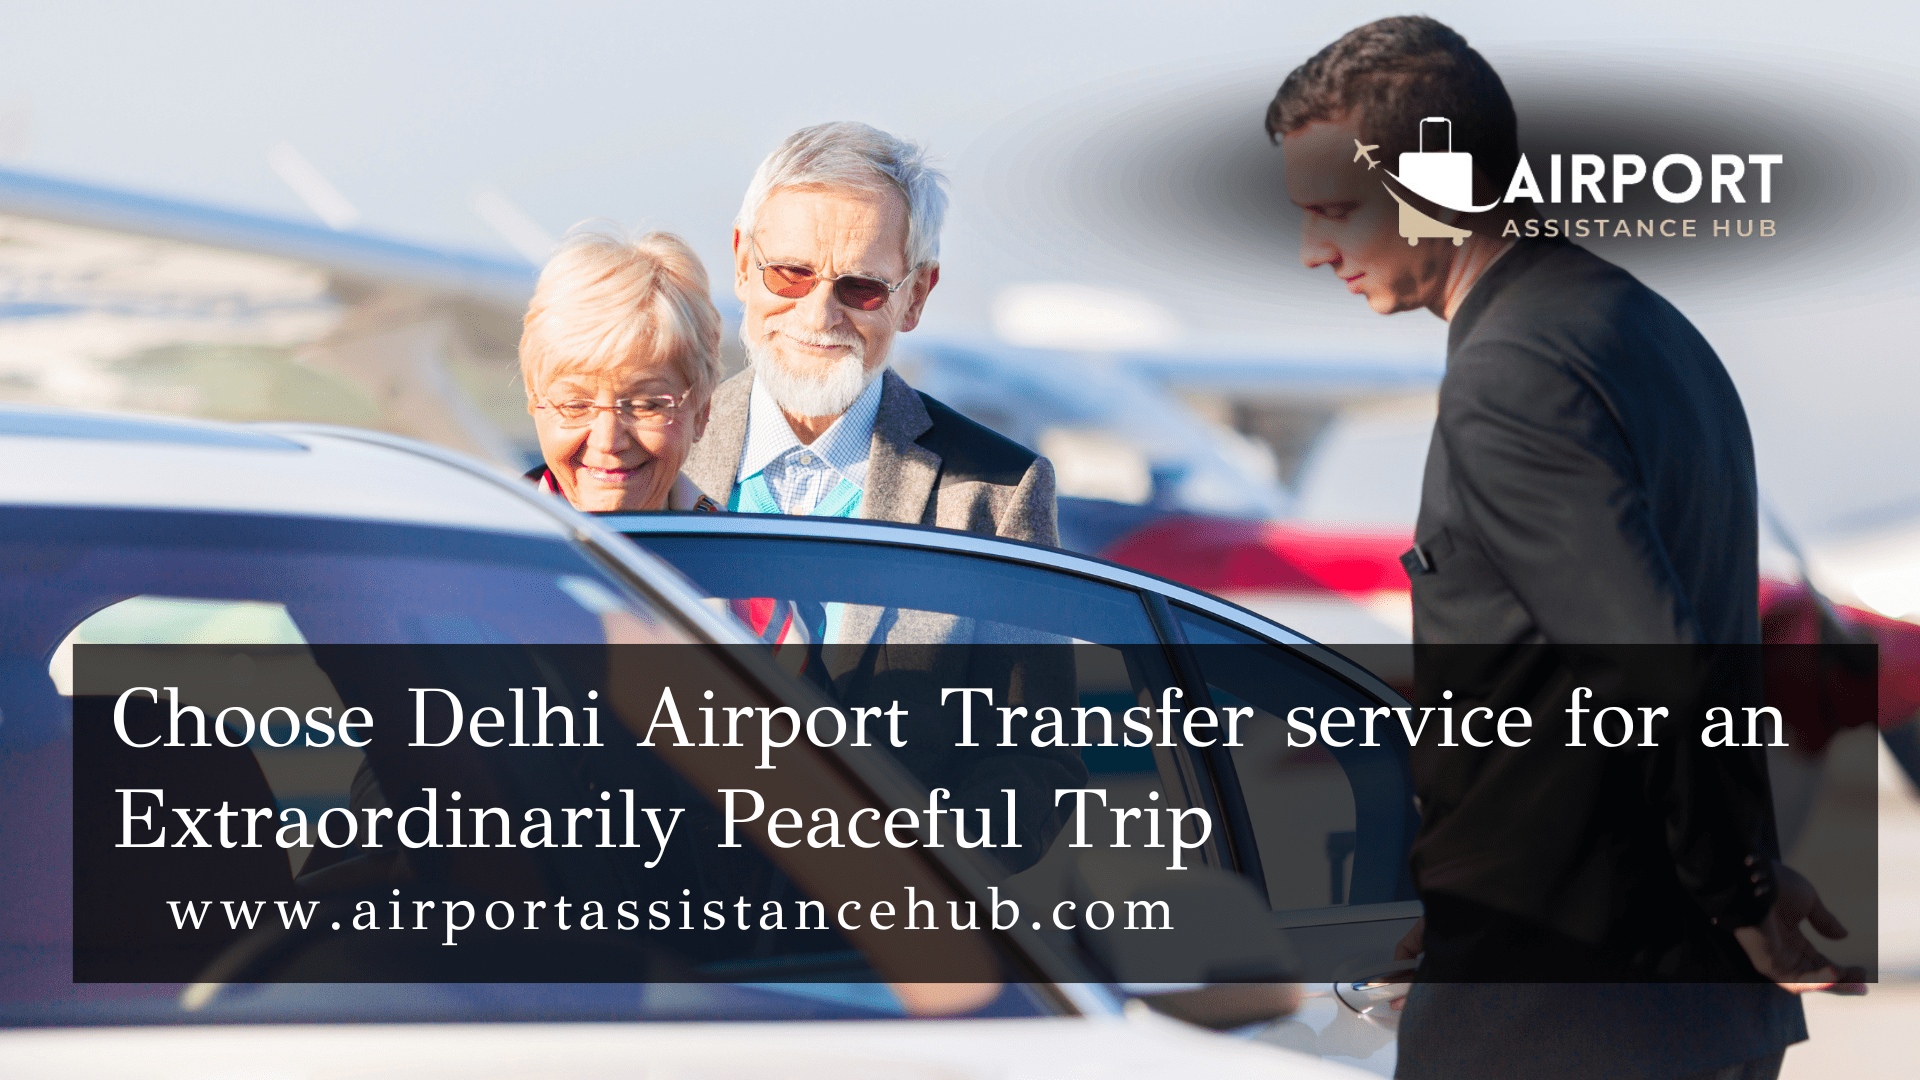 Choose Delhi Airport Transfer service for an Extraordinarily Peaceful Trip